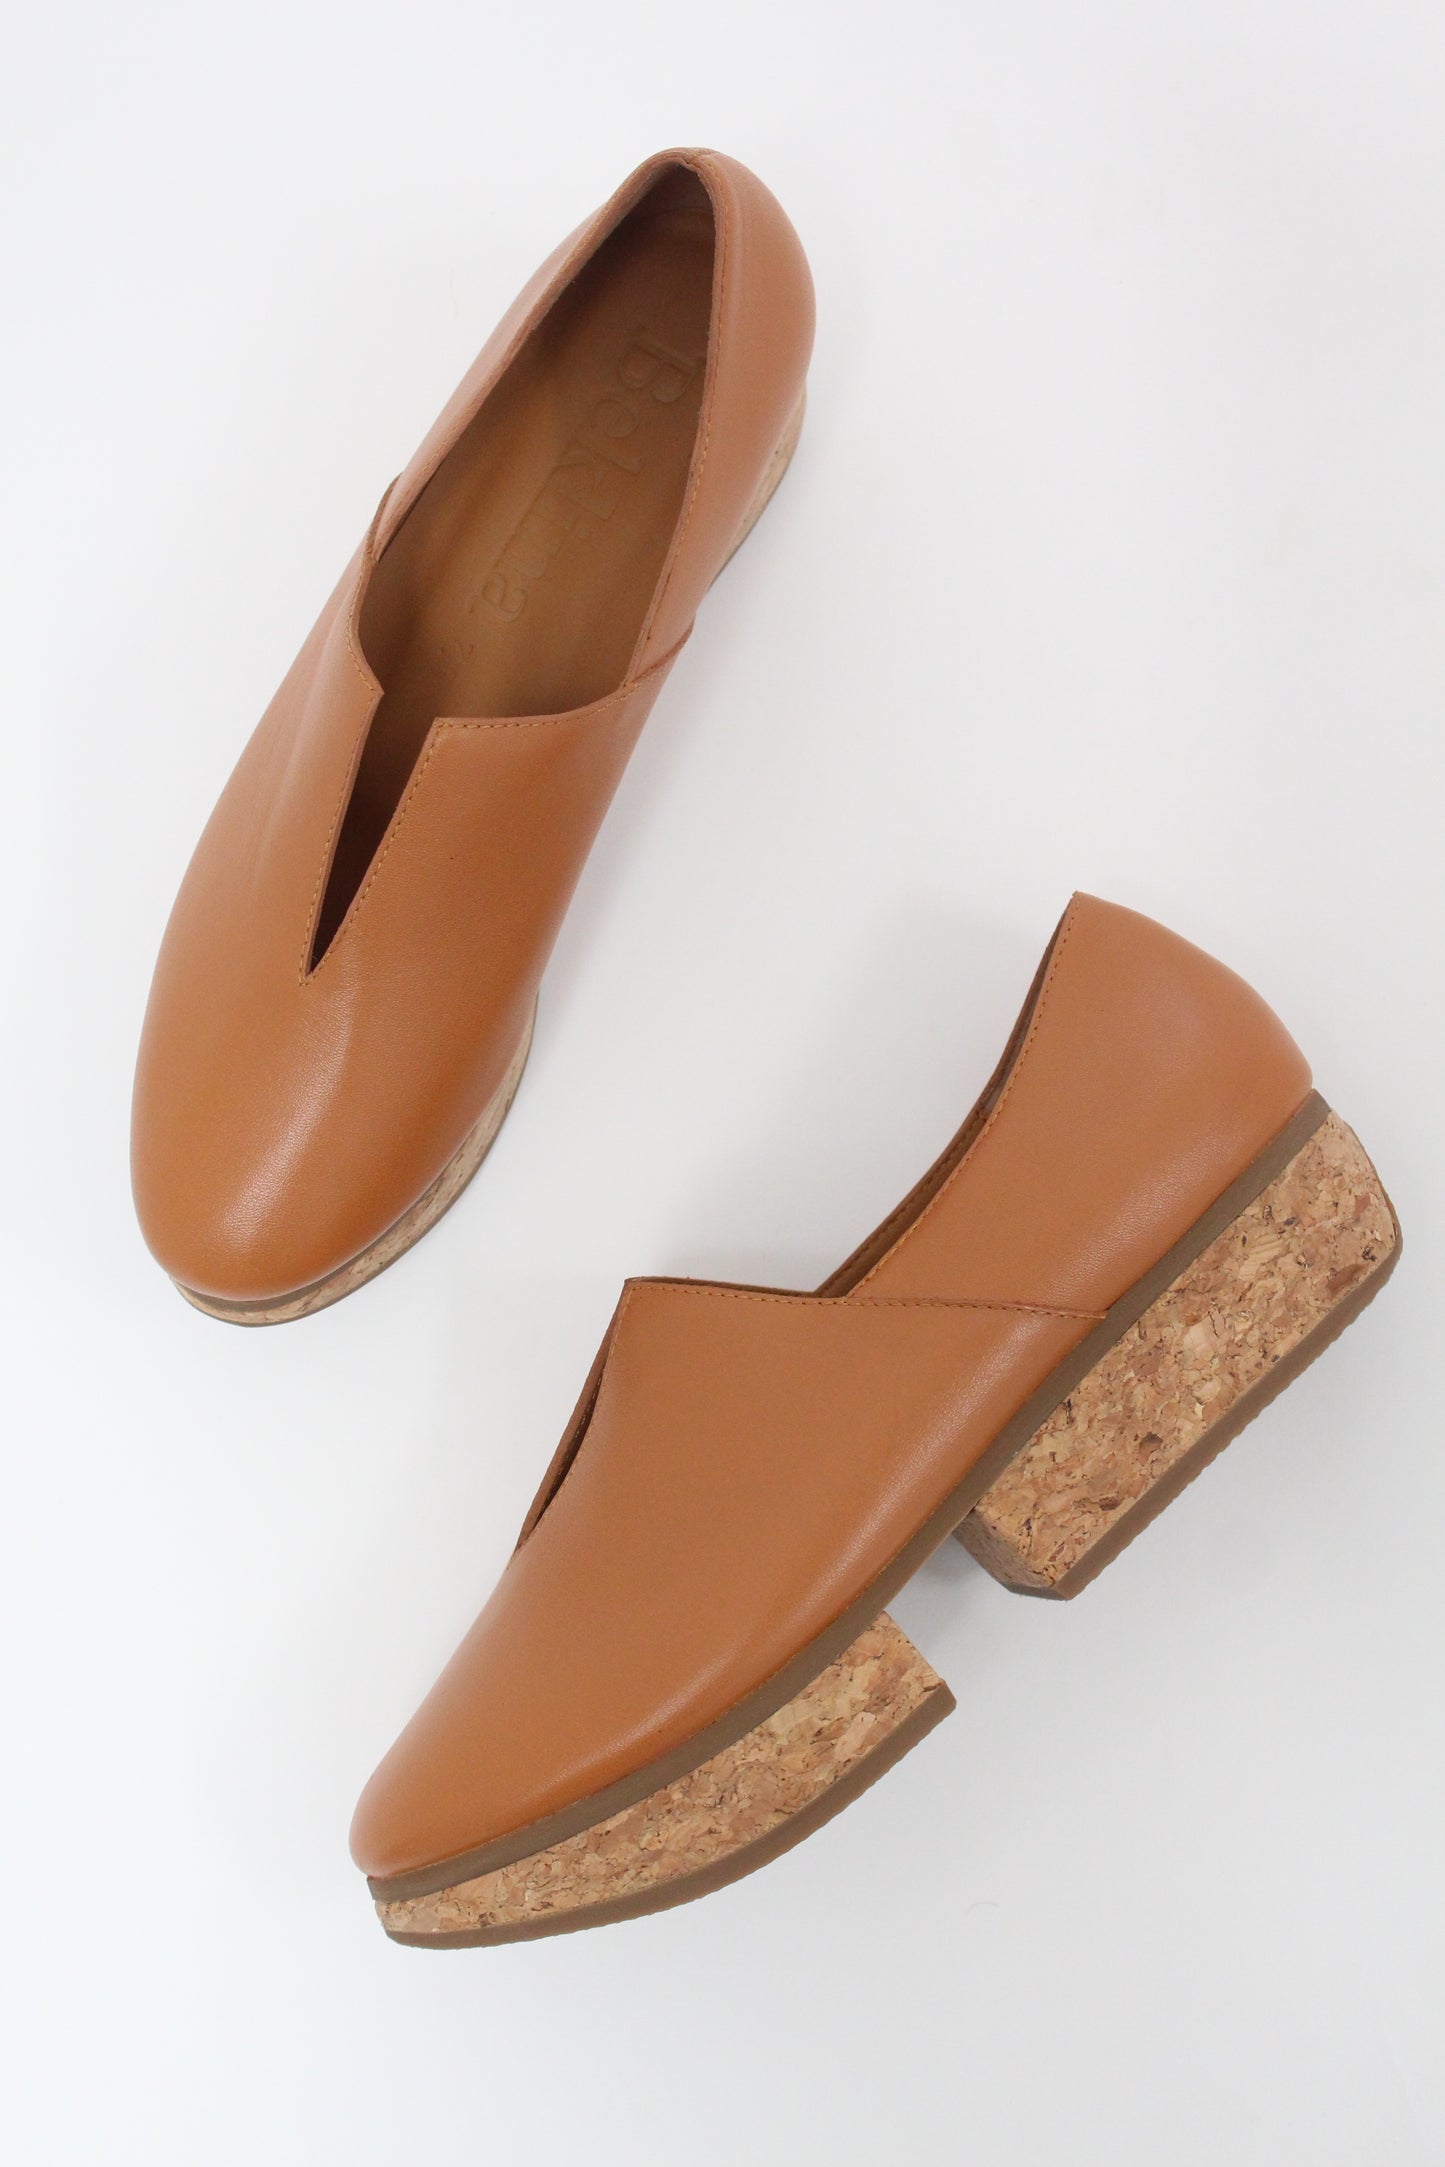 Beklina Tétouan Loafer Dry Clay